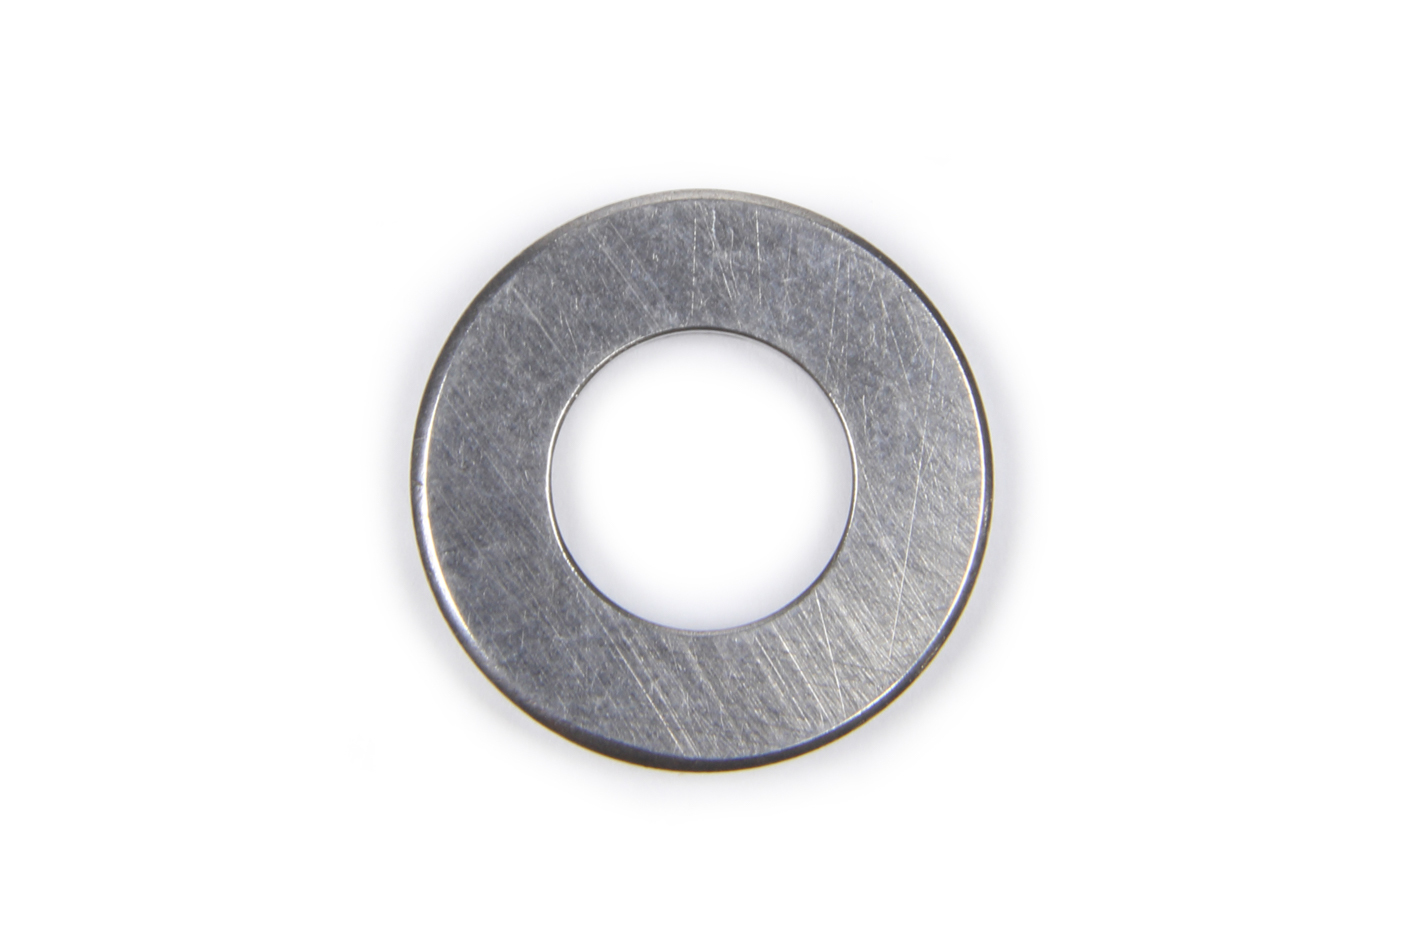 ARP, Stainless Steel Flat Washer - 7/16 ID x 3/4 OD (1)